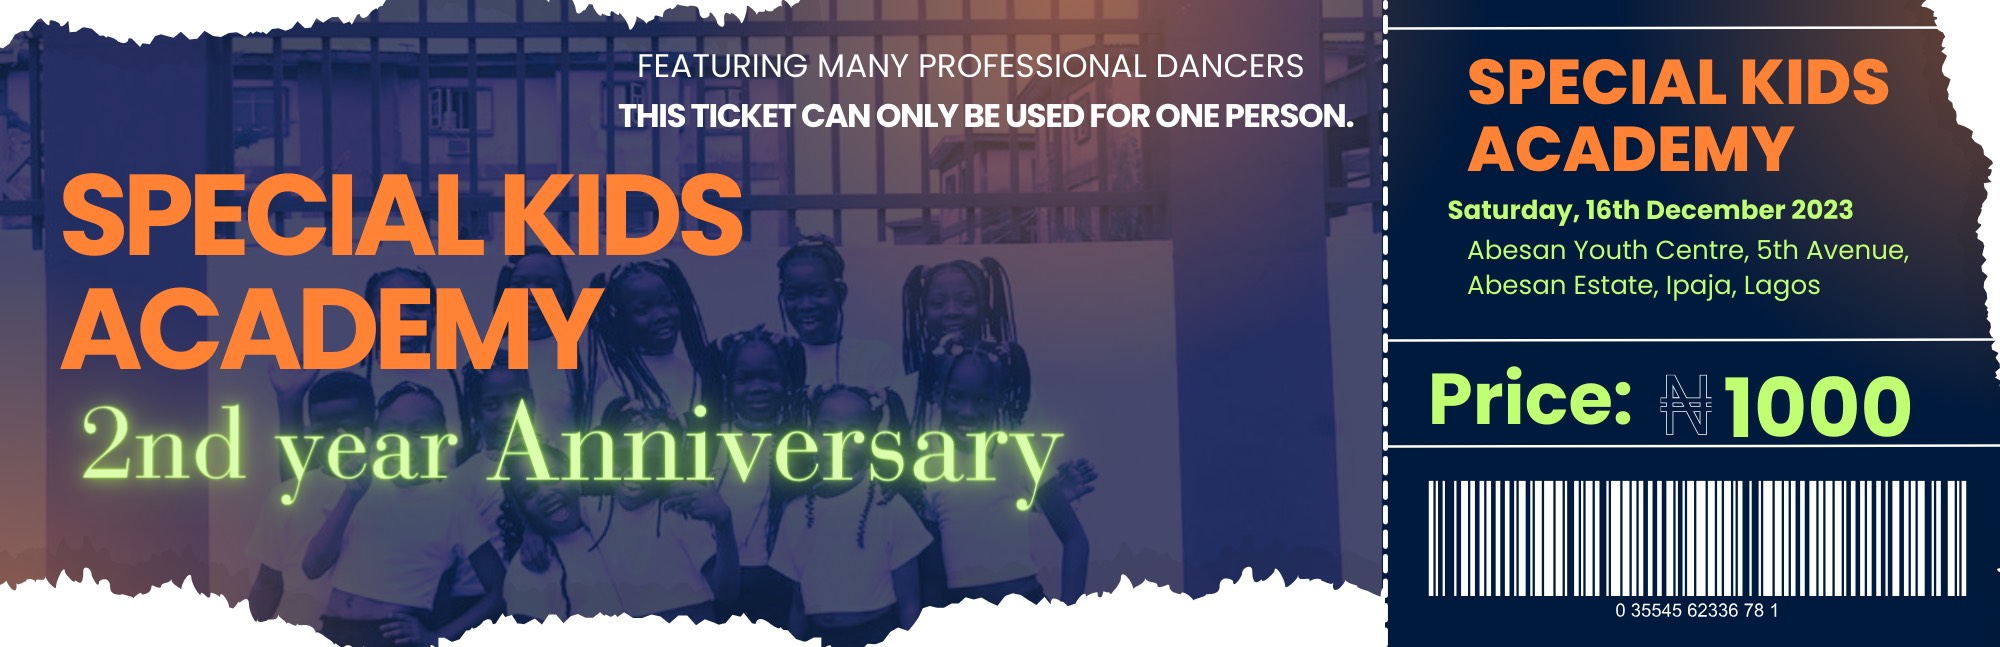 2 year anniversary - Special Kids Academy Post free event in Nigeria using tickethub.ng, buy and sell tickets to event